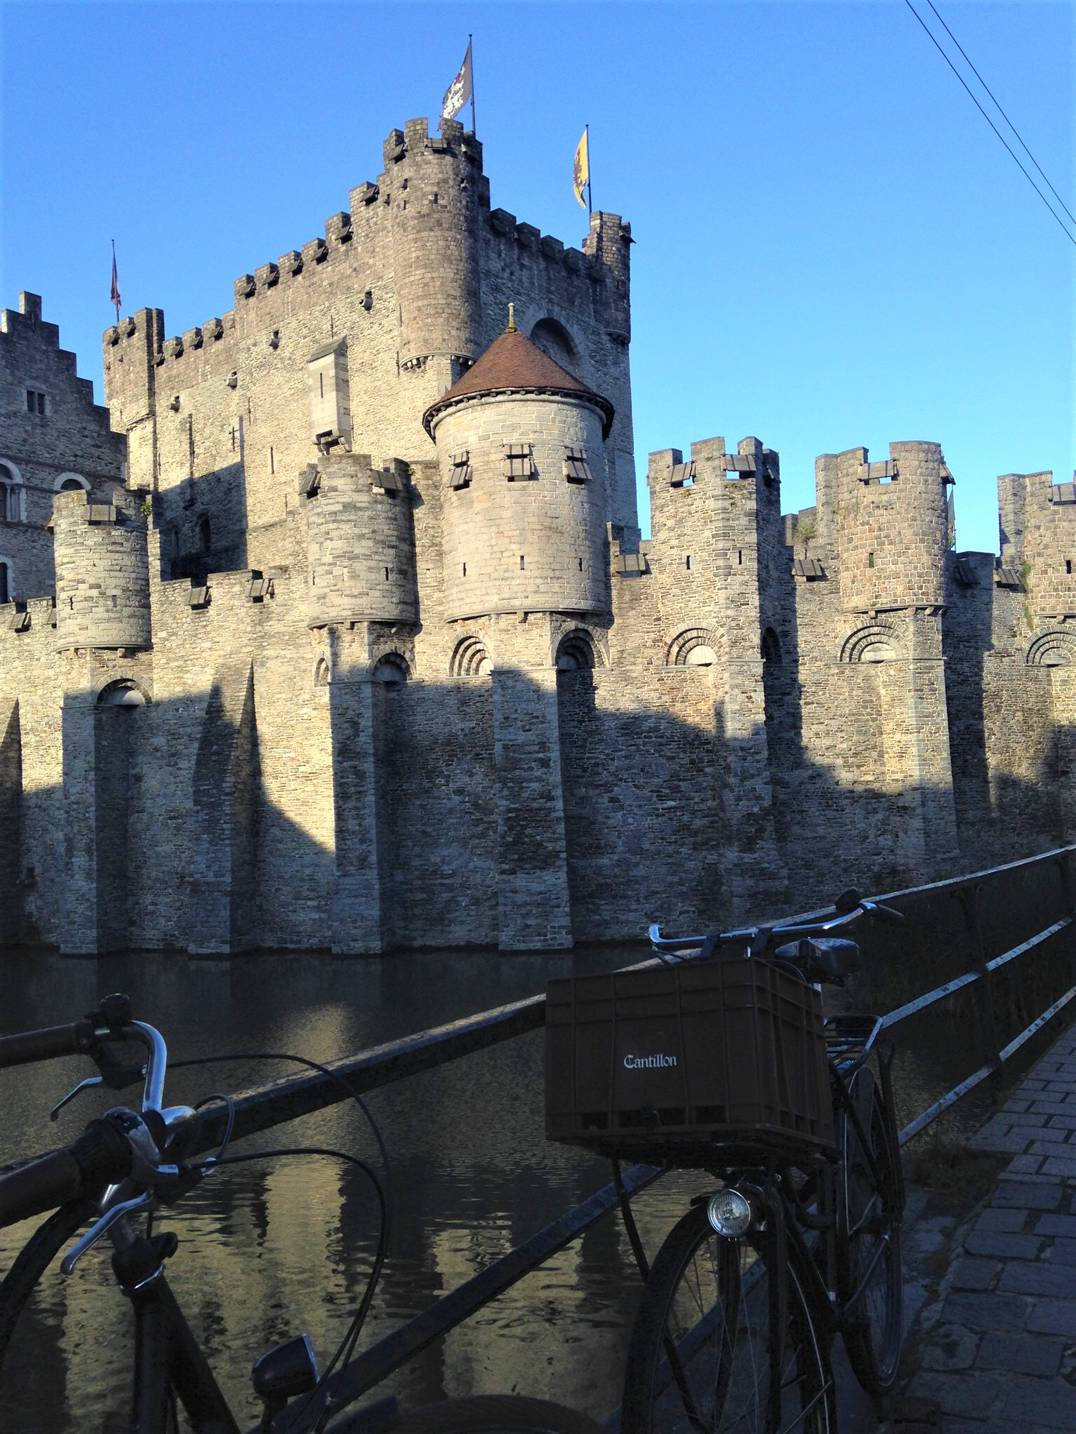 A picture of Gravensteen castle in Ghent, Belgium with a bike in the fore ground.